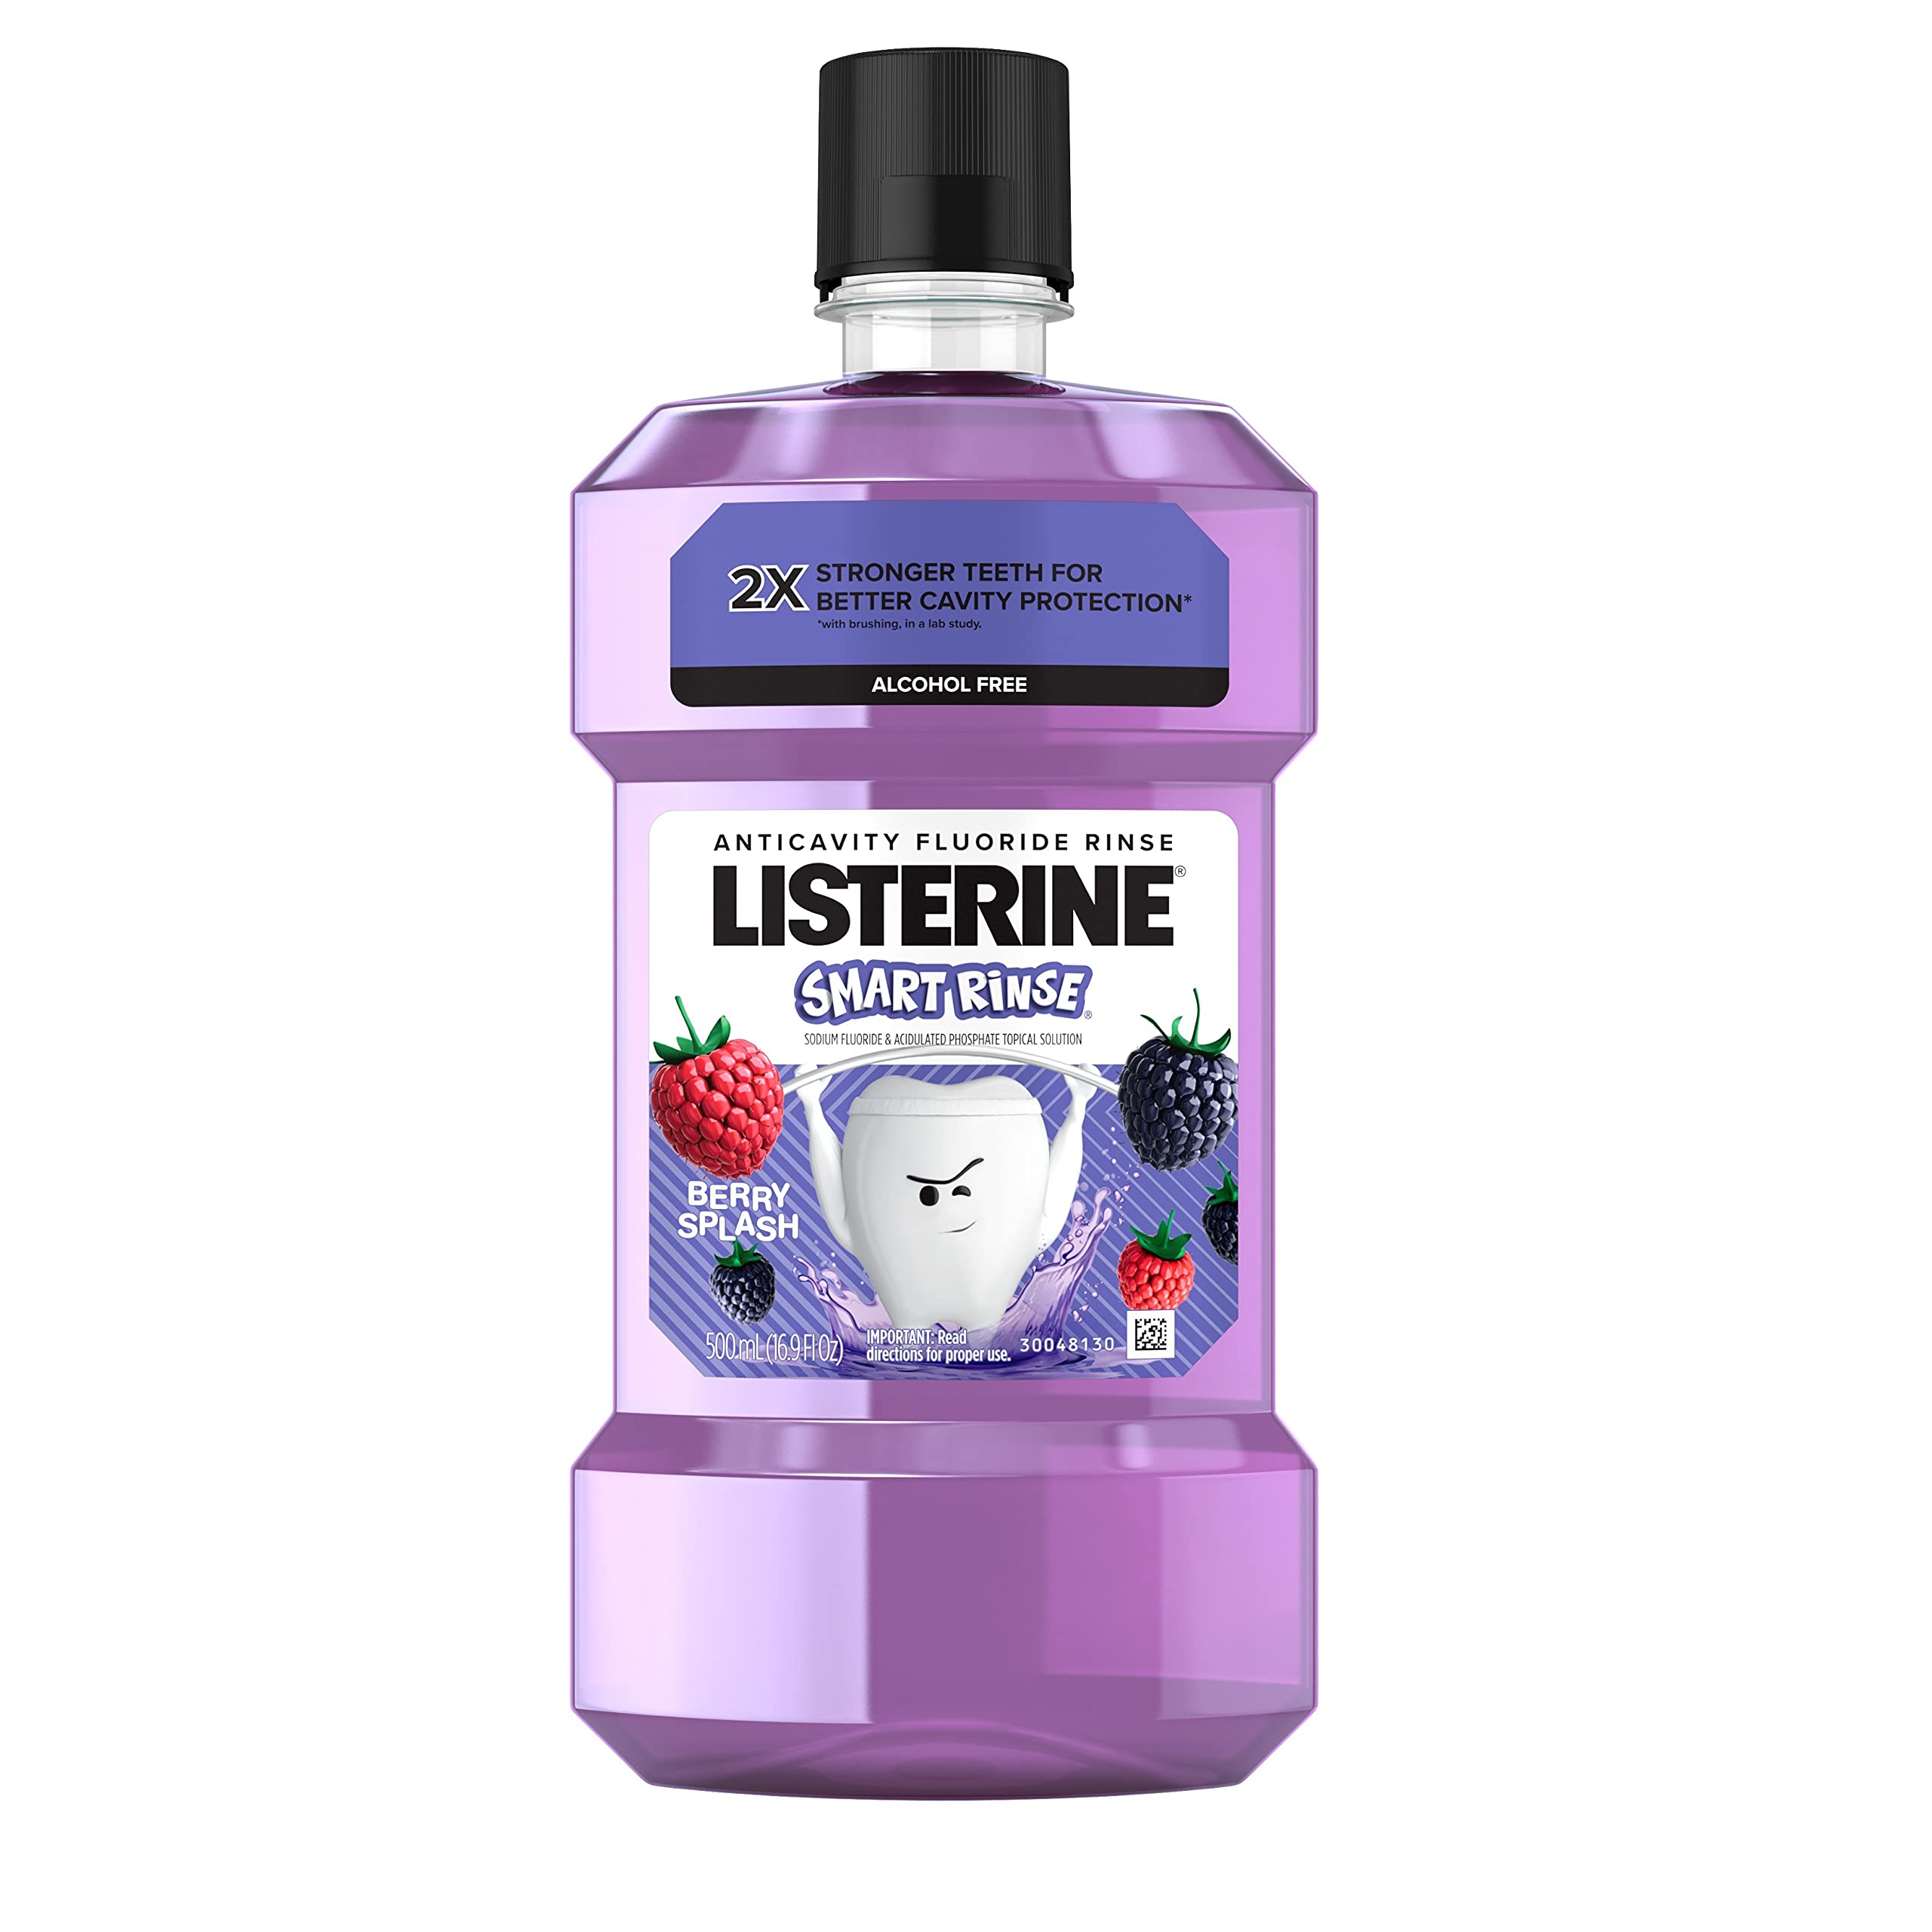 16.9-Ounce Listerine Smart Rinse Mouthwash for Kids (Berry Splash) $4.74 w/ S&S + Free Shipping w/ Prime or $35+ $3.74